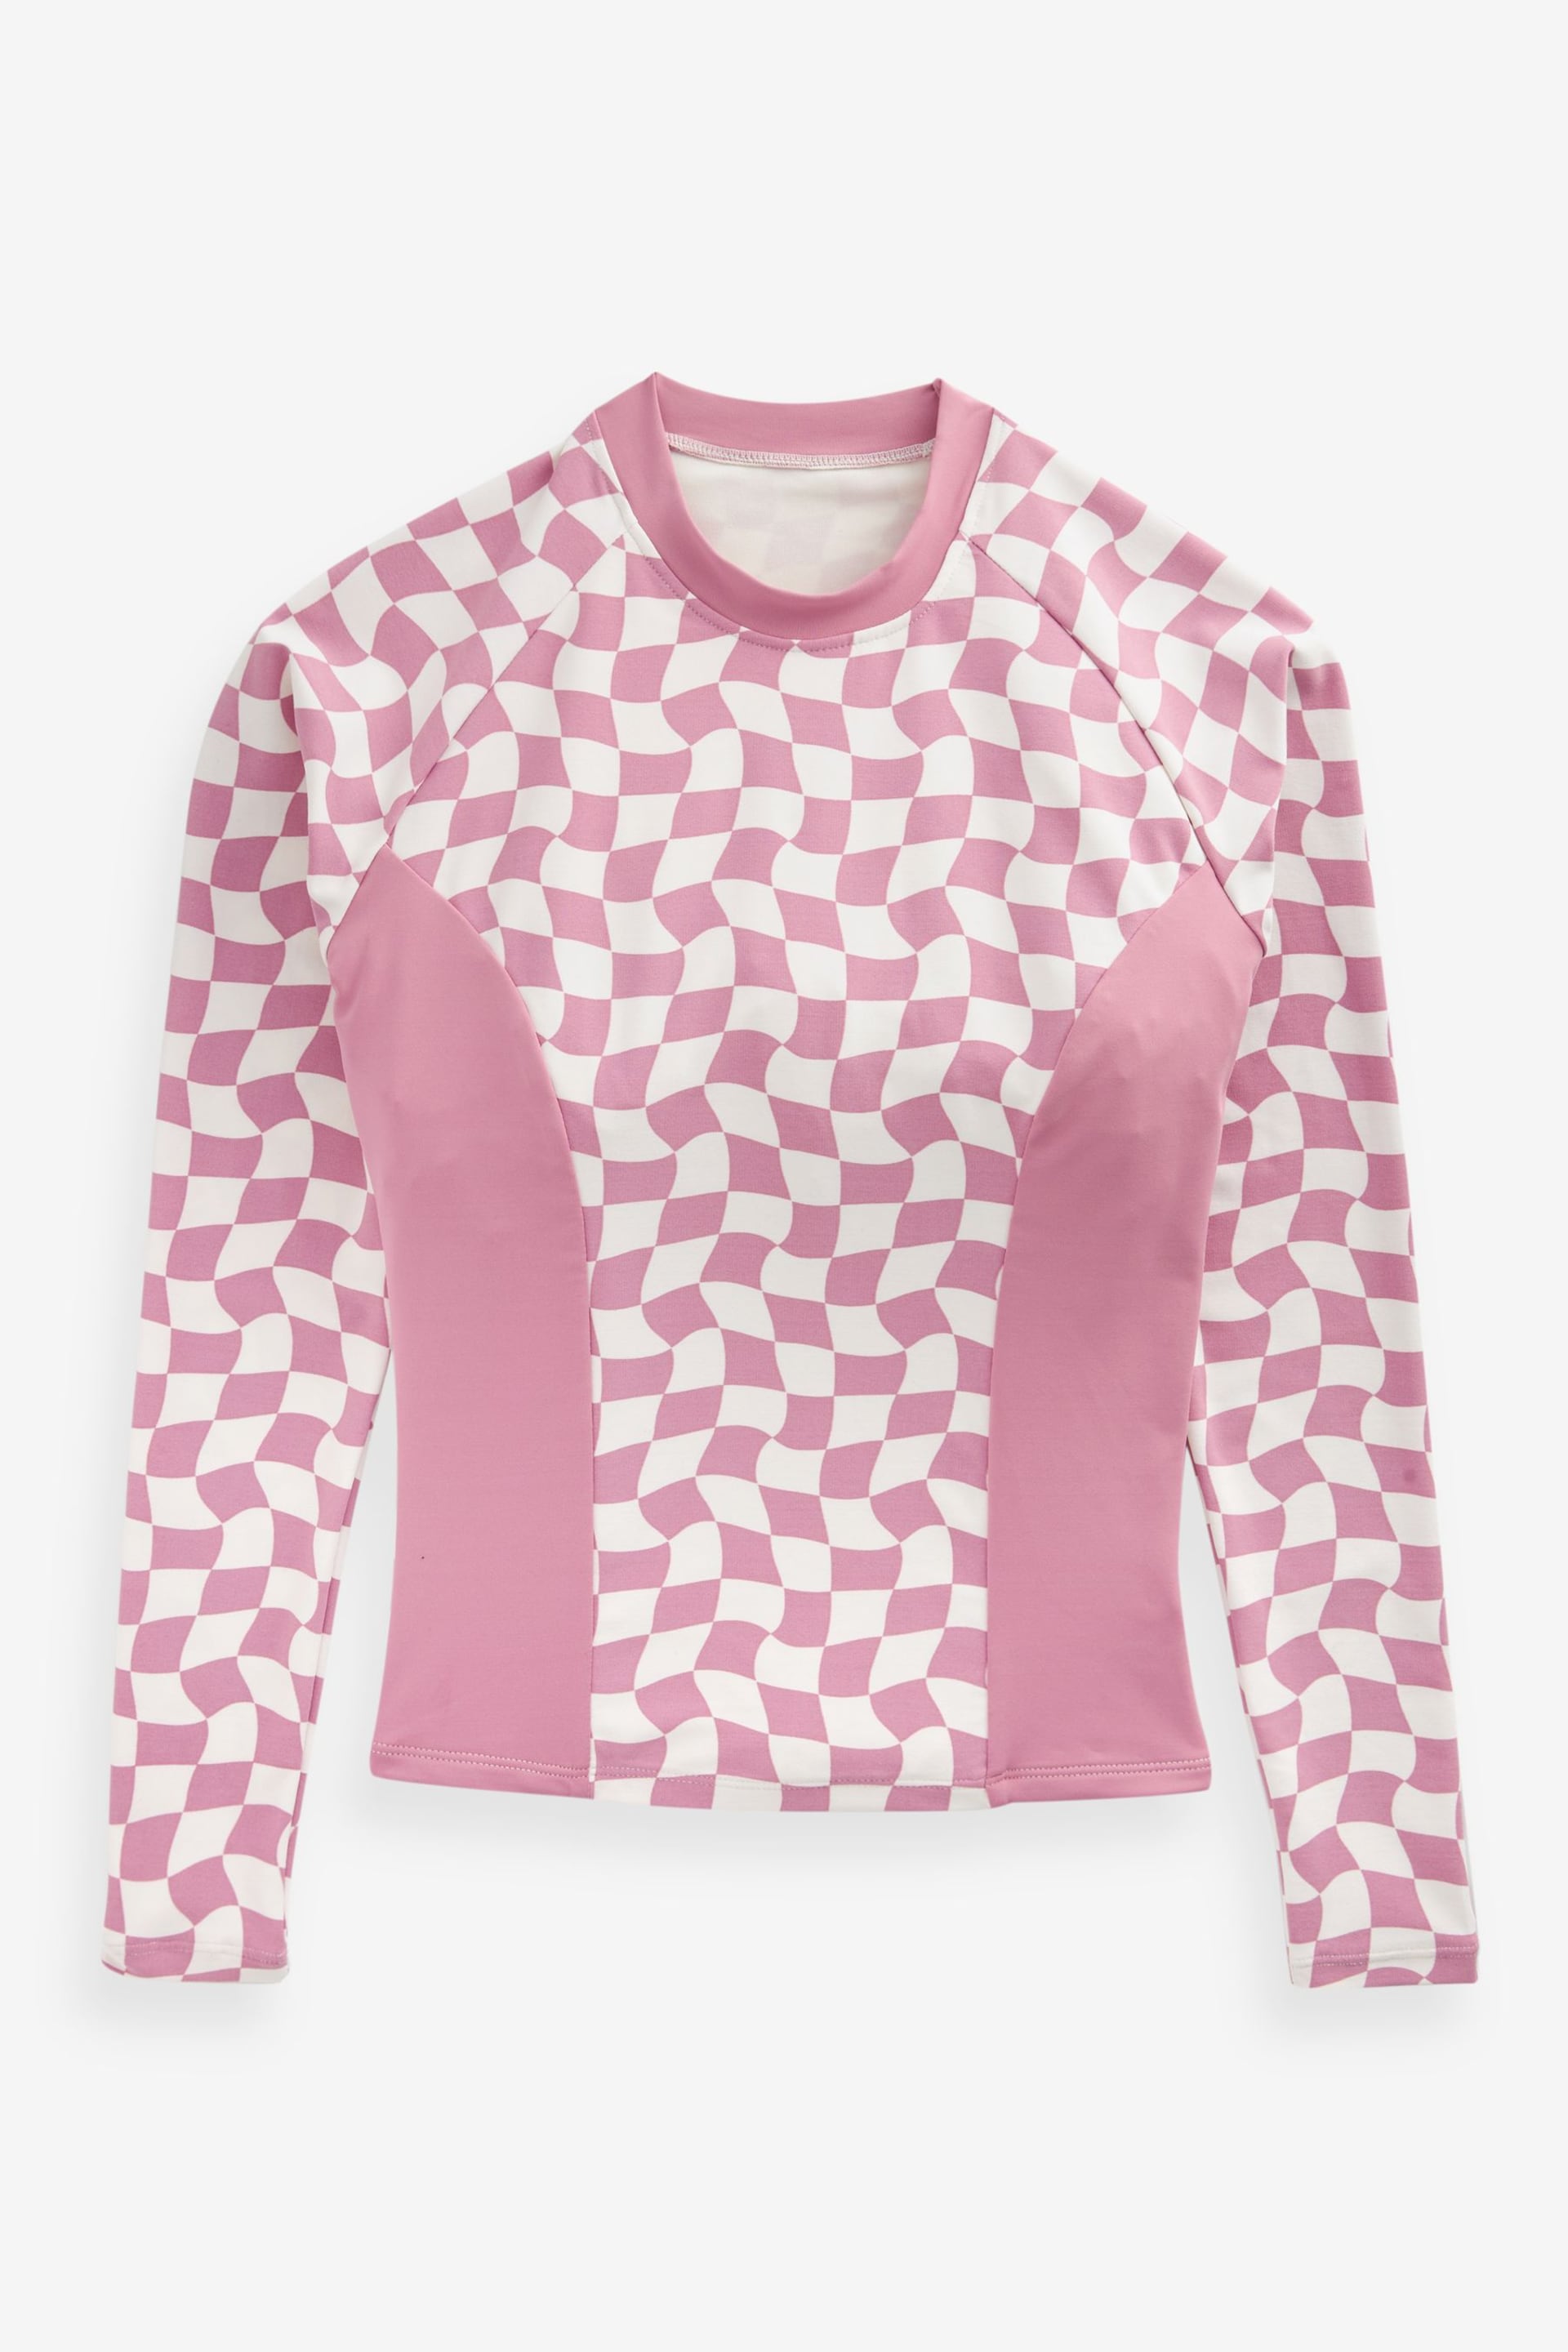 Pink/White Contrast Checkerboard Long Sleeve Rash Vest - Image 4 of 4